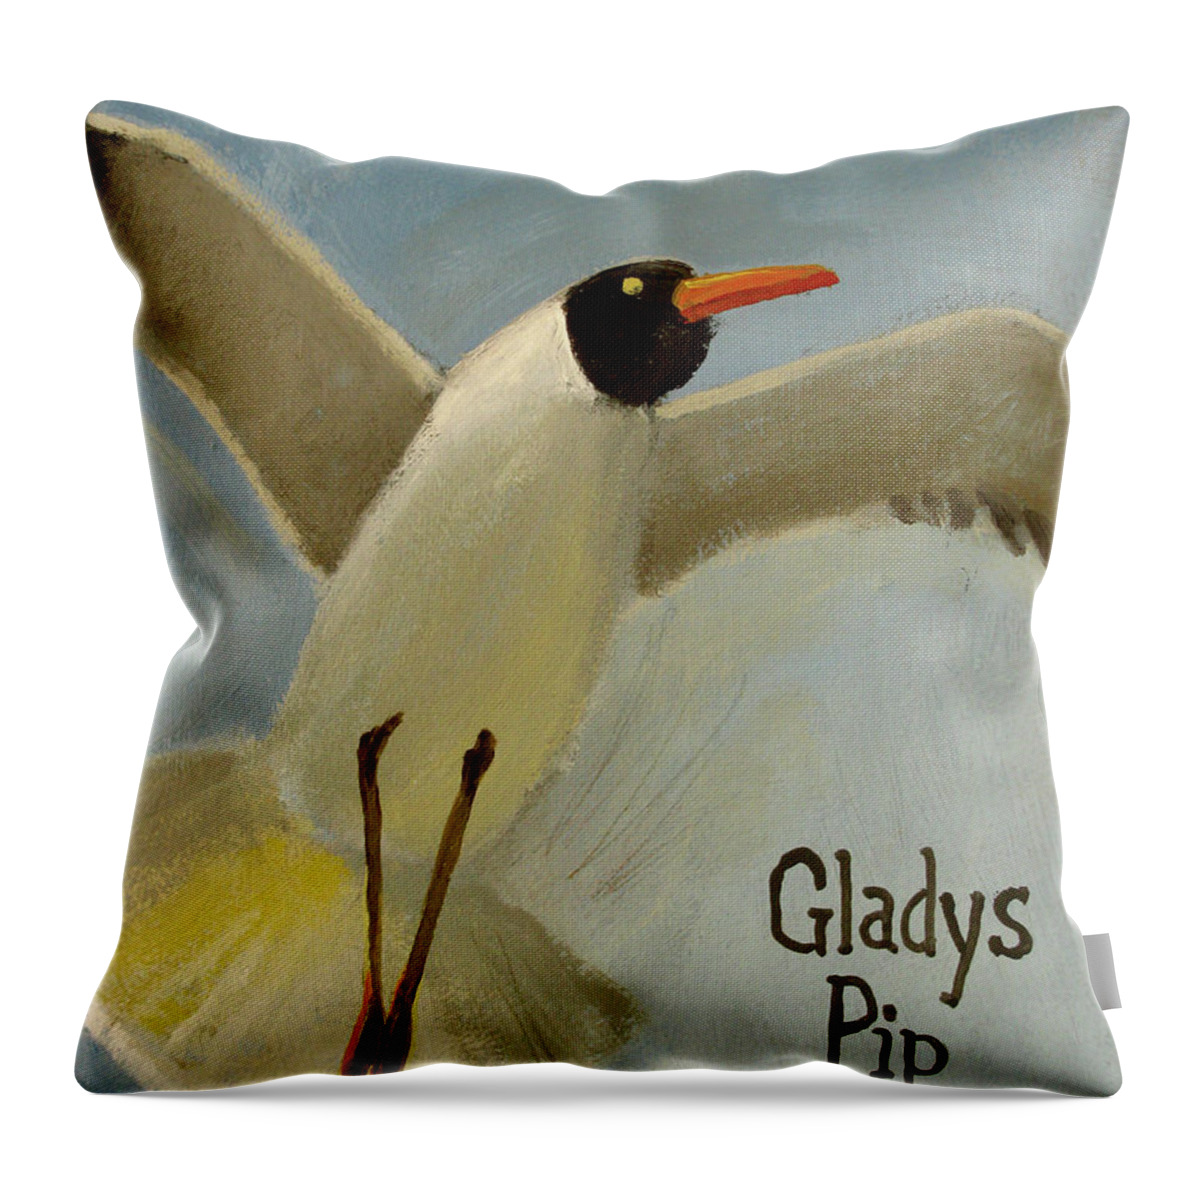 Seagull Throw Pillow featuring the painting Gladys Pip by Don Morgan